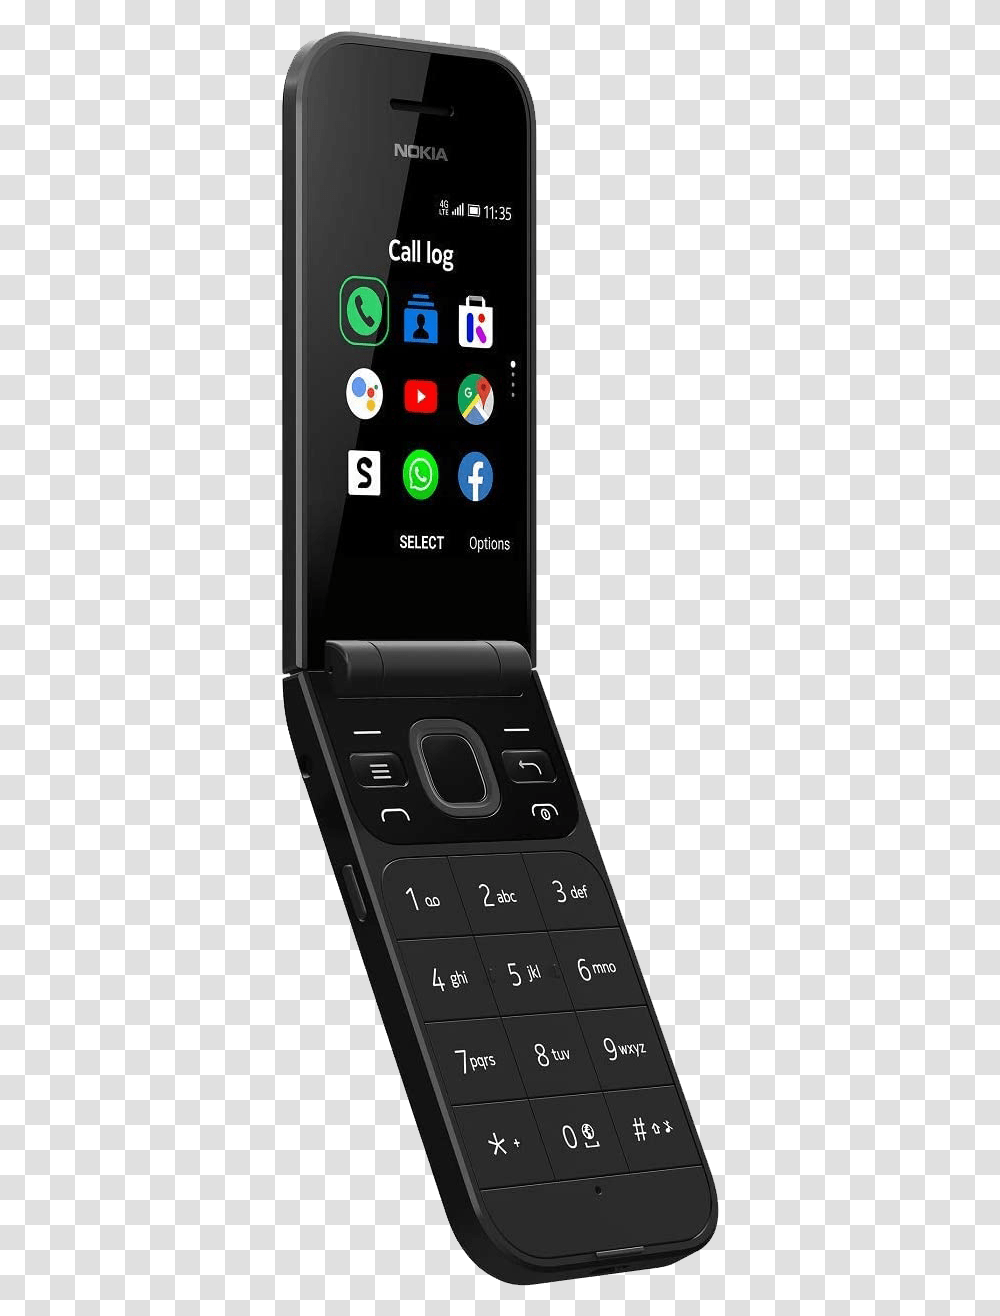 Best Flip Phones In 2021 Nokia Folding Phone New, Mobile Phone, Electronics, Cell Phone, Remote Control Transparent Png